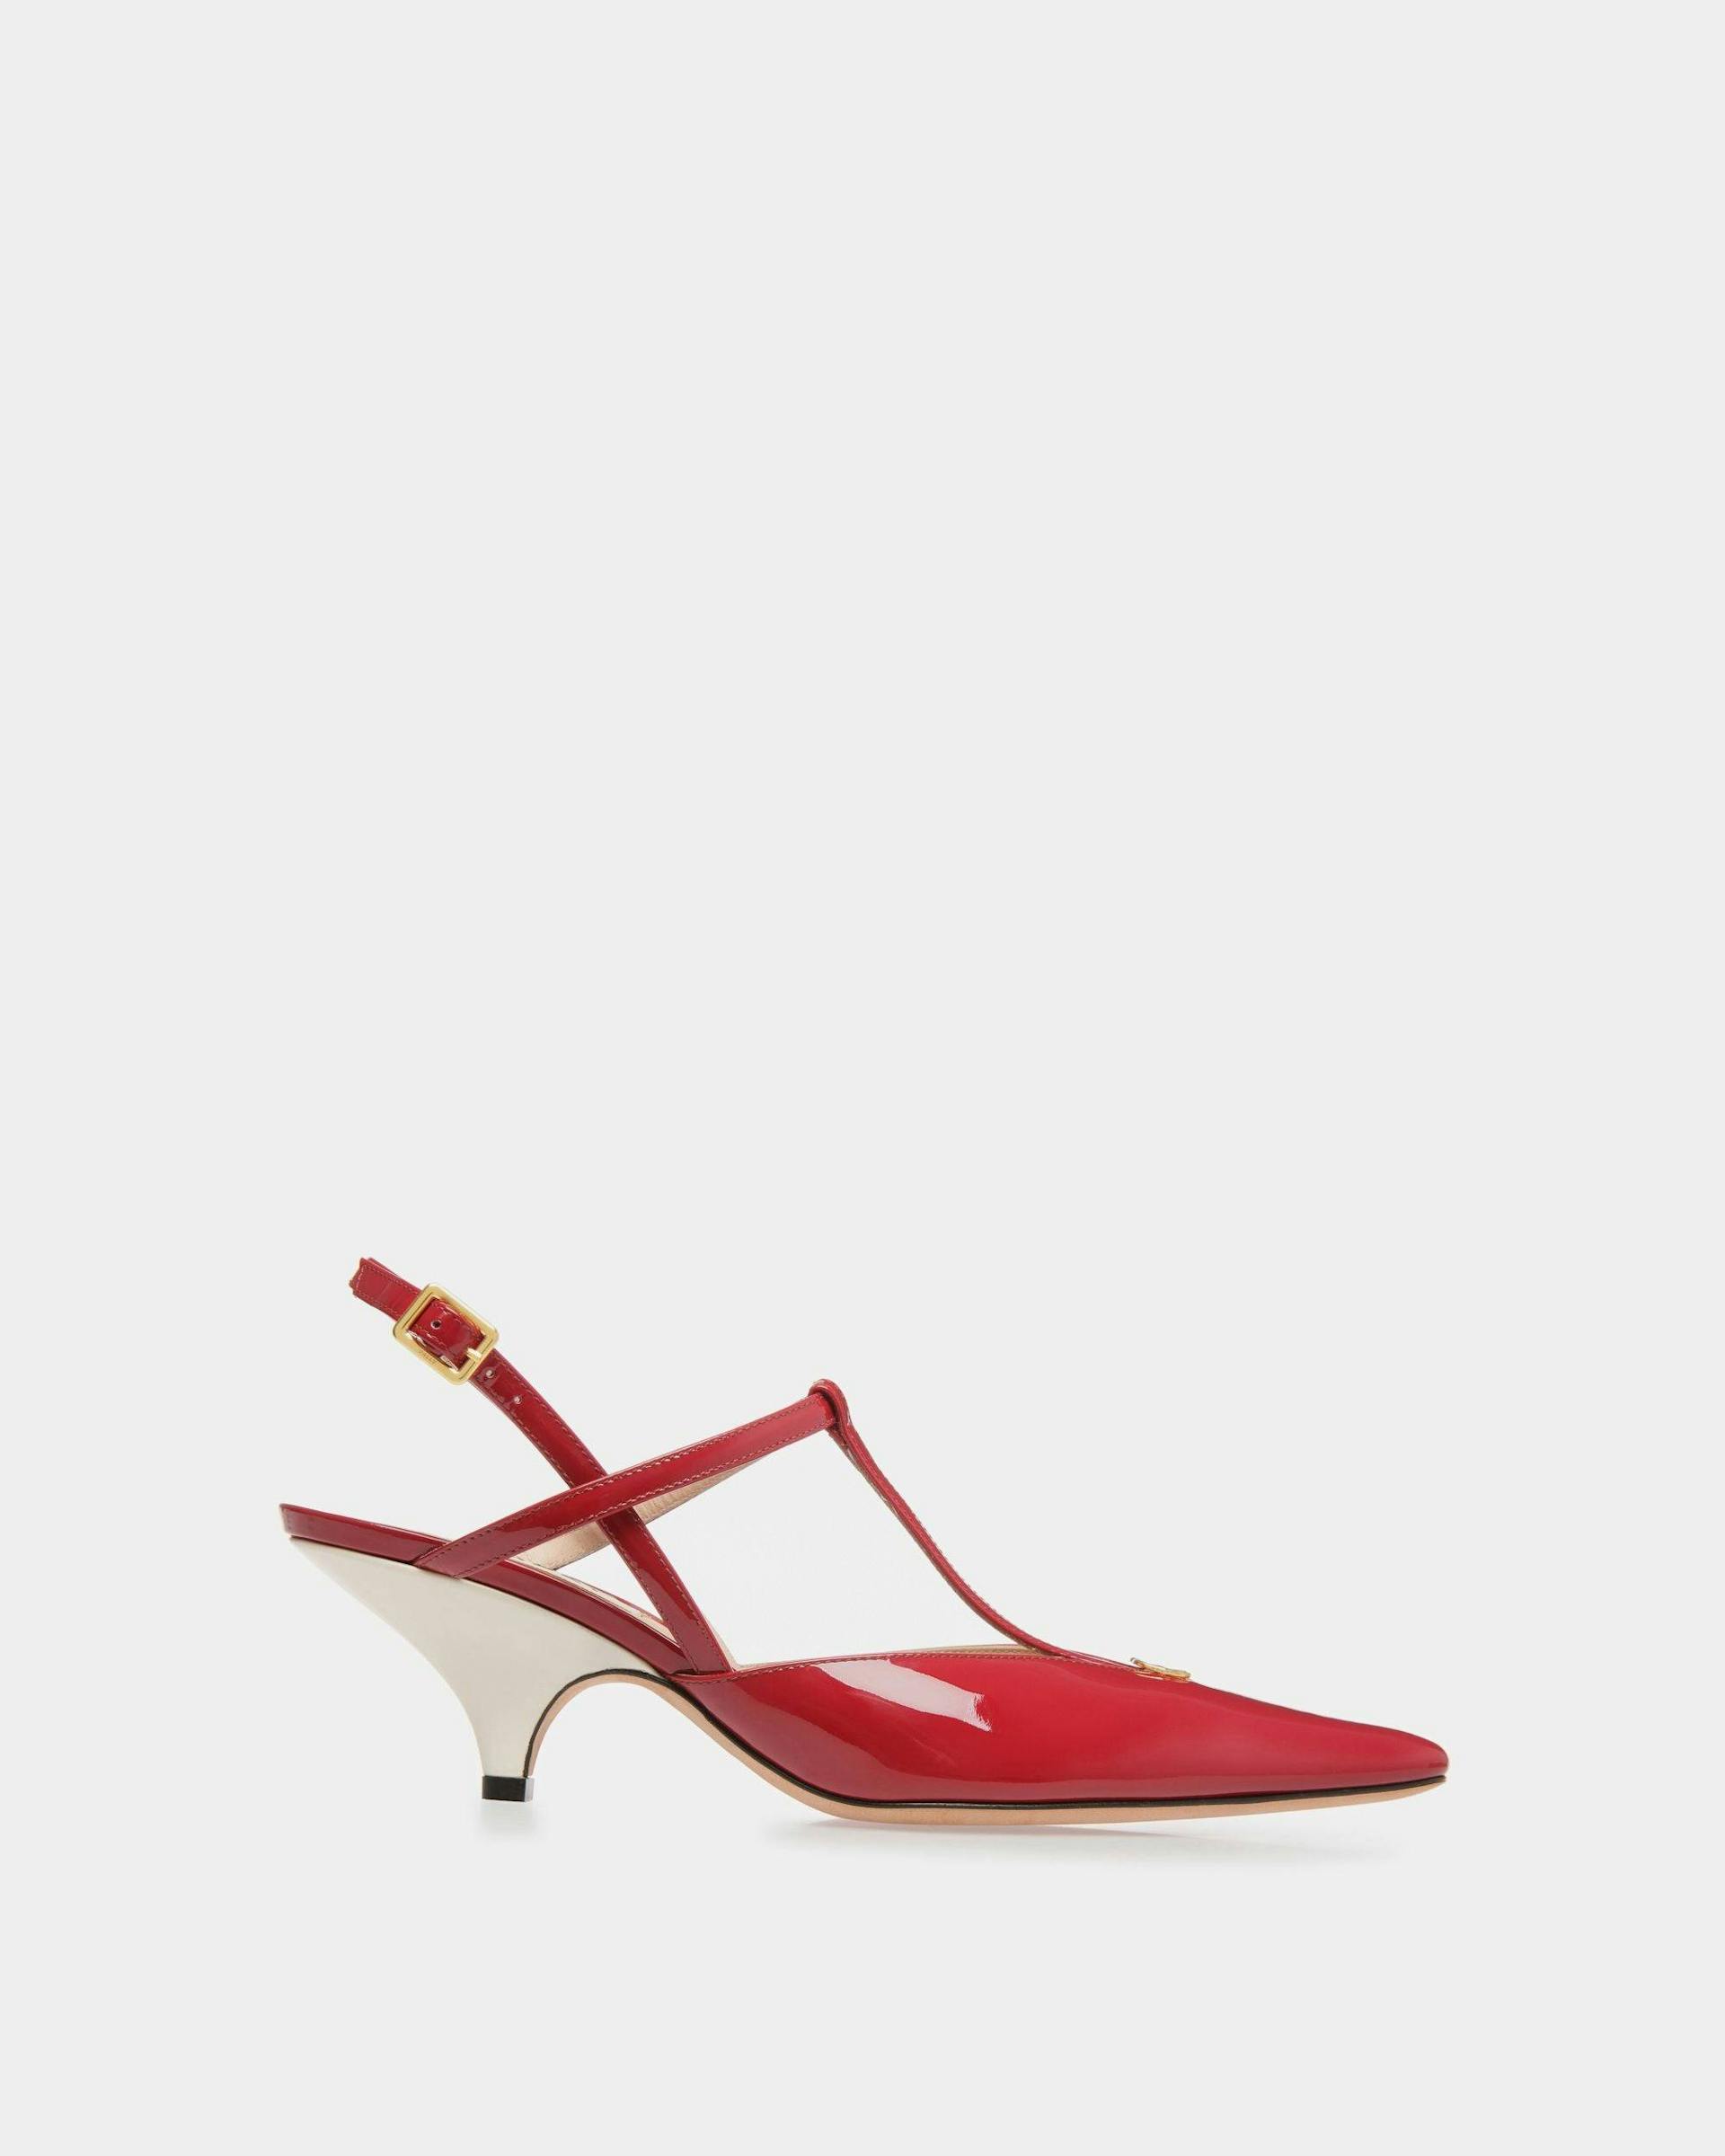 Women's Katy Sling Pump In Ruby Red And Bone Leather | Bally | Still Life Side